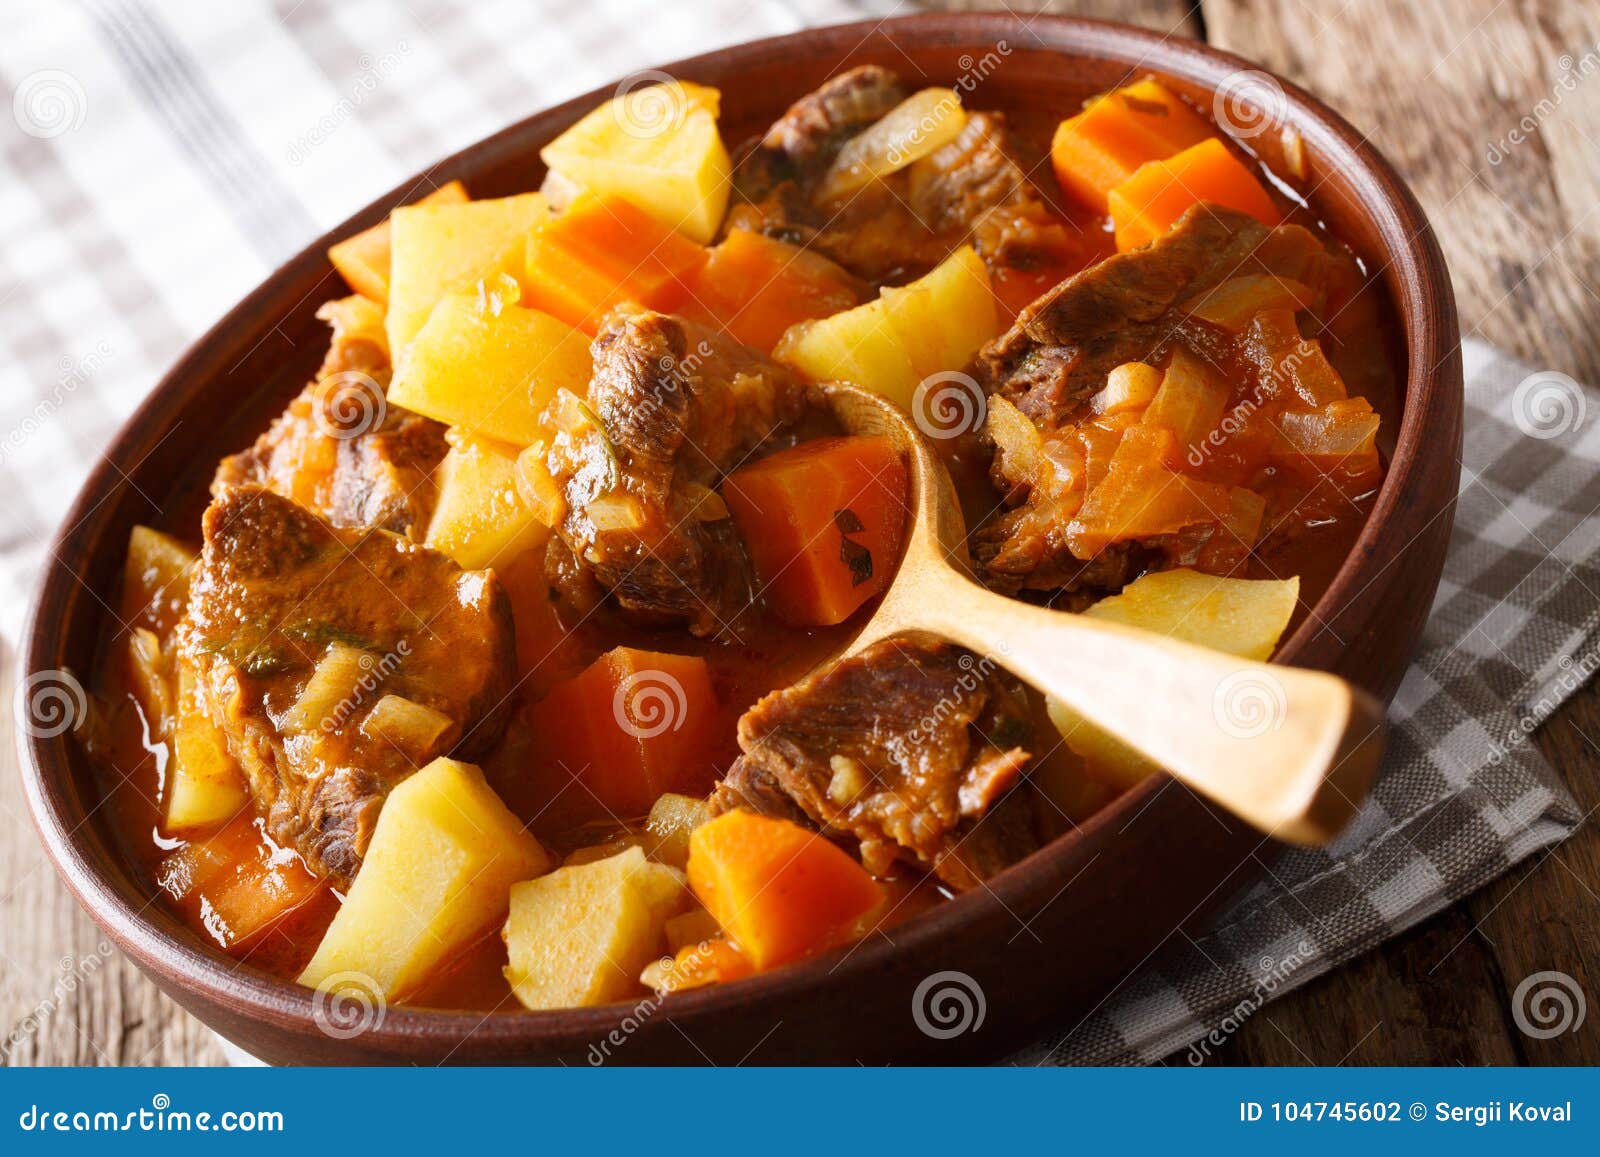 spanish stew estofado with beef and vegetables in a bowl close-up. horizontal